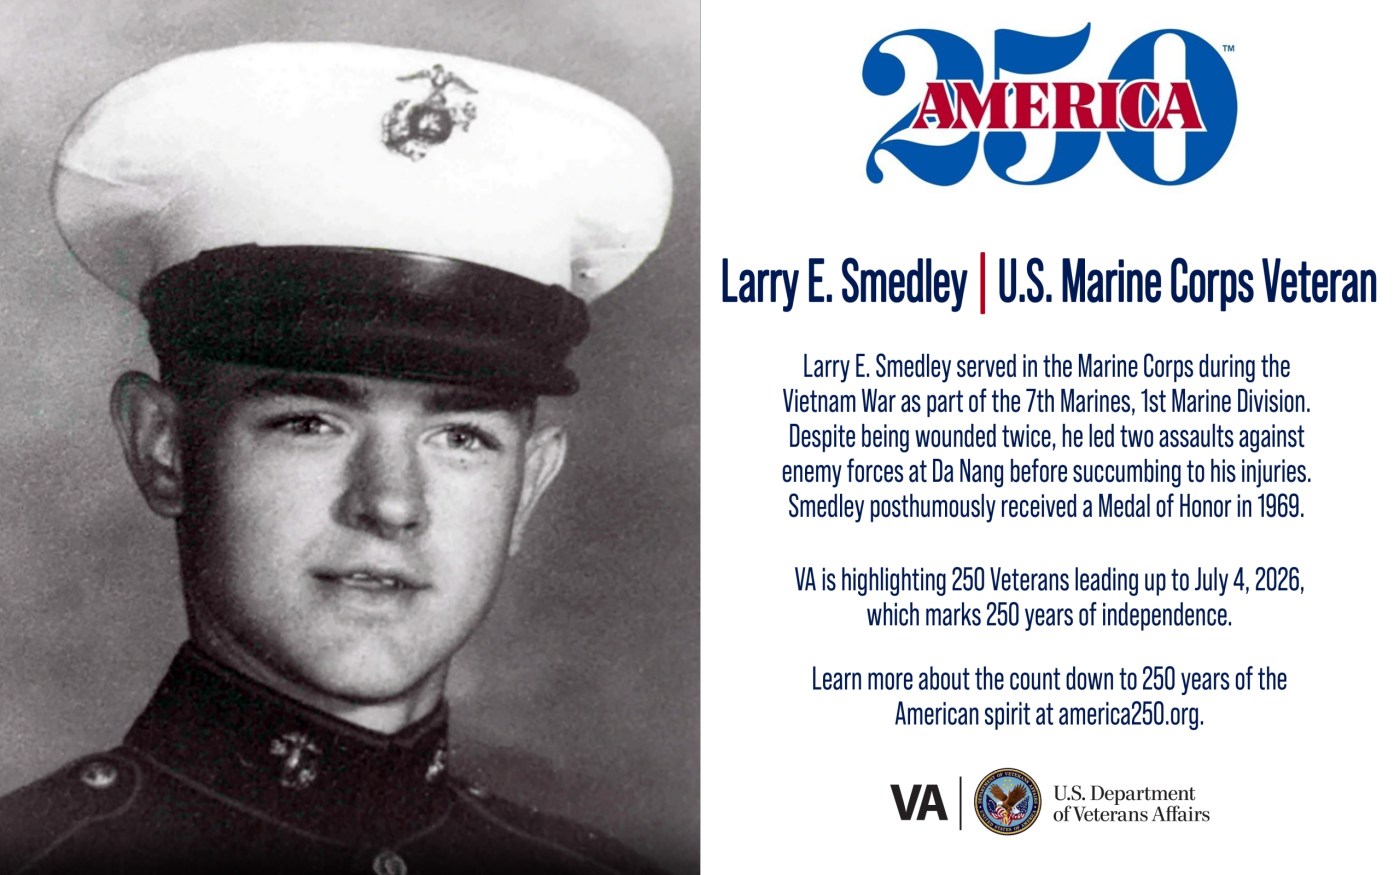 This week’s America250 salute is Marine Corps Veteran Larry E. Smedley, who posthumously received a Medal of Honor for his actions during a battle at Da Nang.